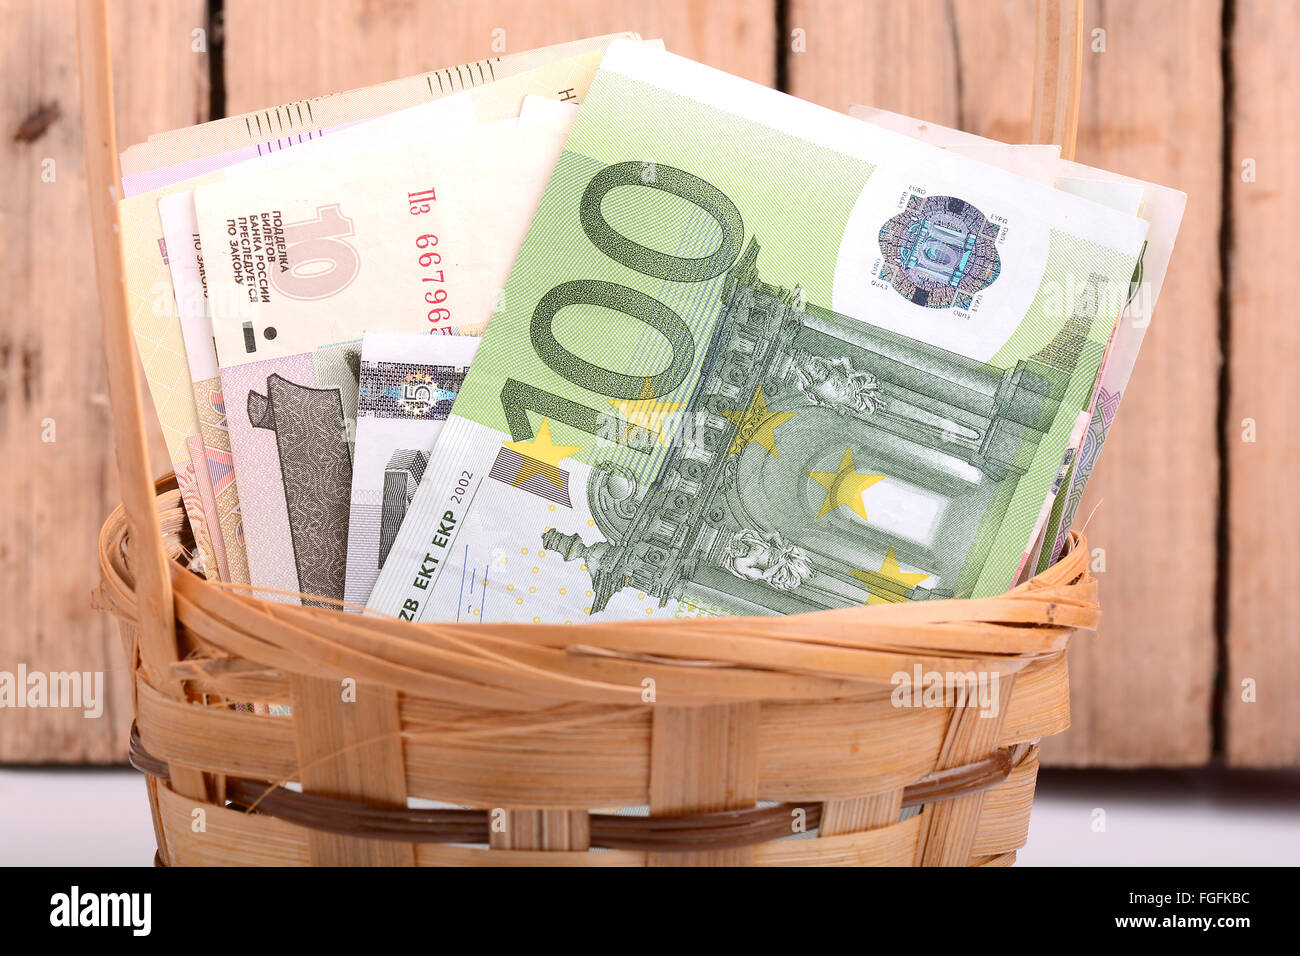 money set in a basket, dollars, euro and russian money Stock Photo